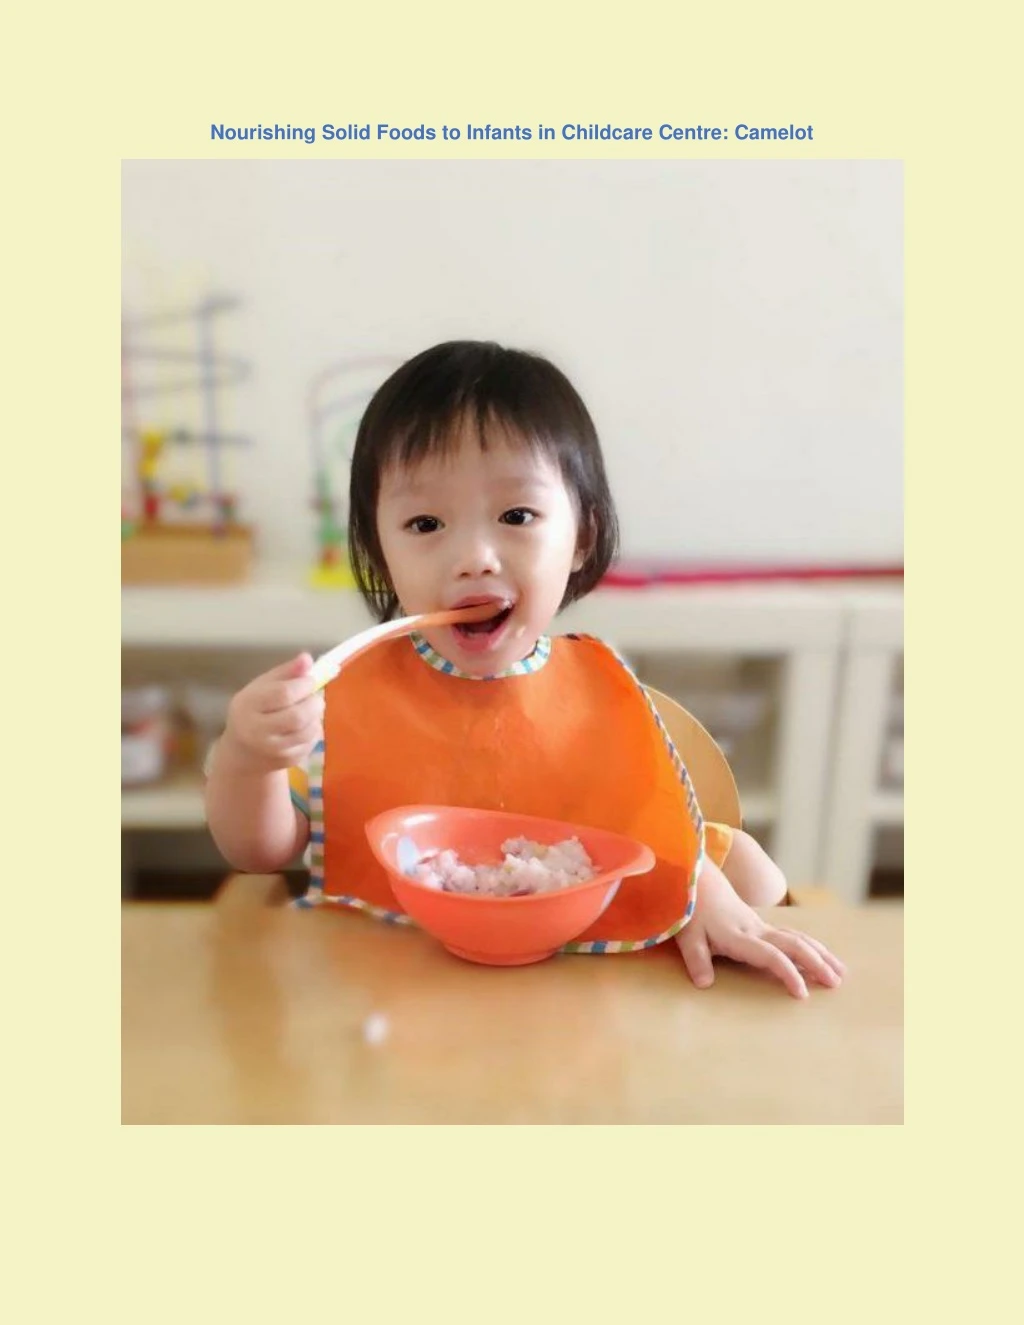 nourishing solid foods to infants in childcare